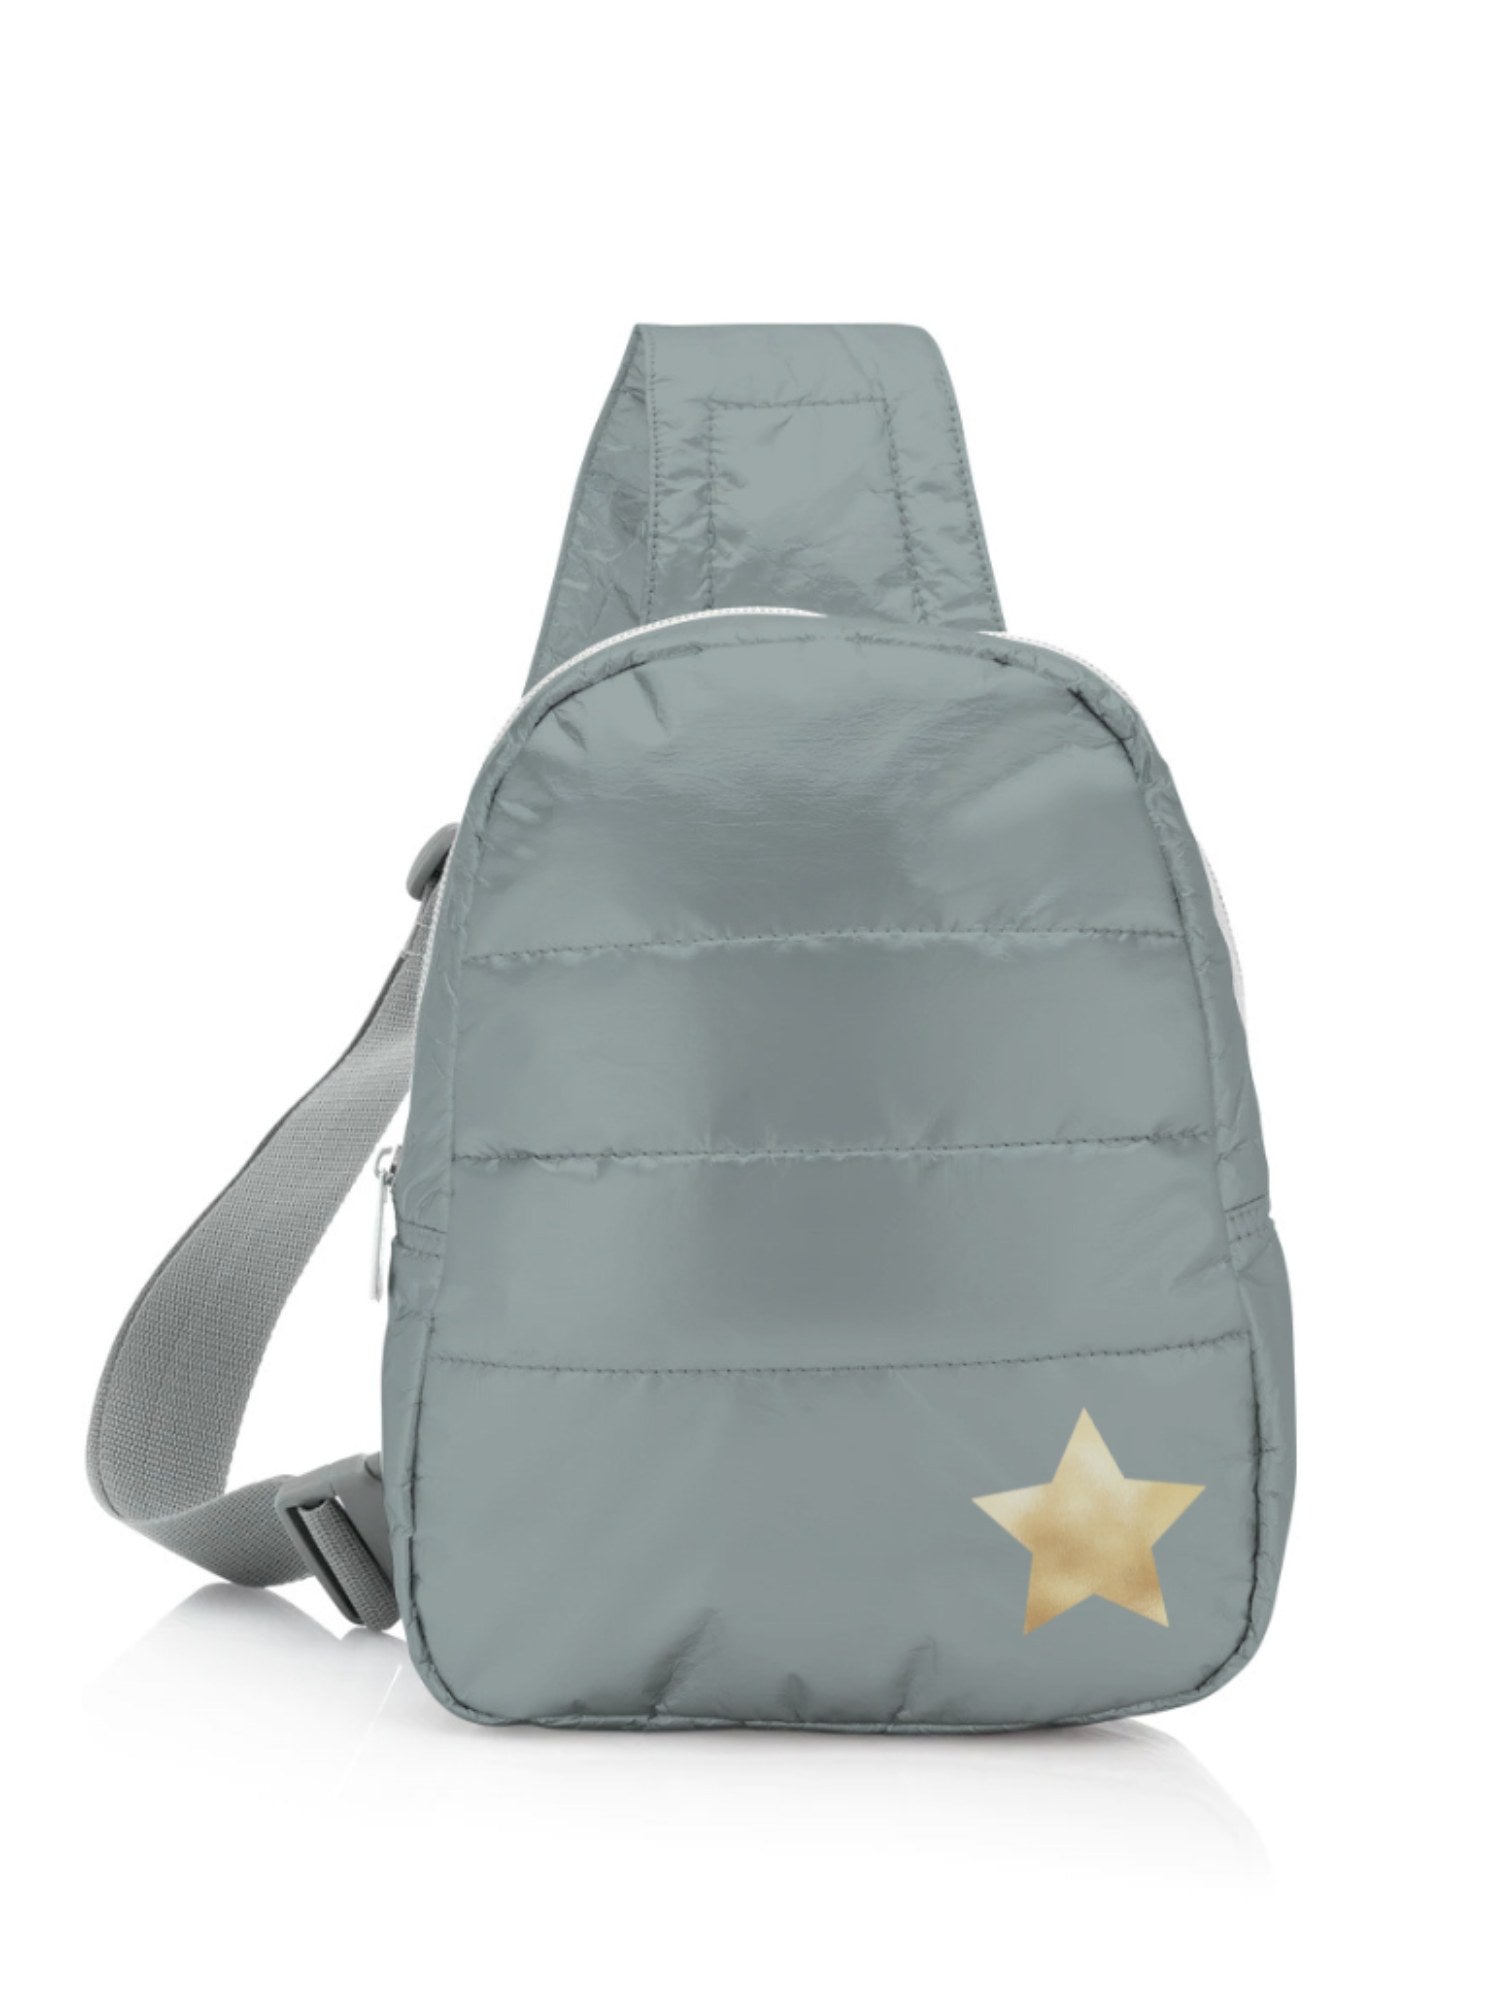 Puffer Crossbody Backpack in Shimmer Gray with Golden Beige Star